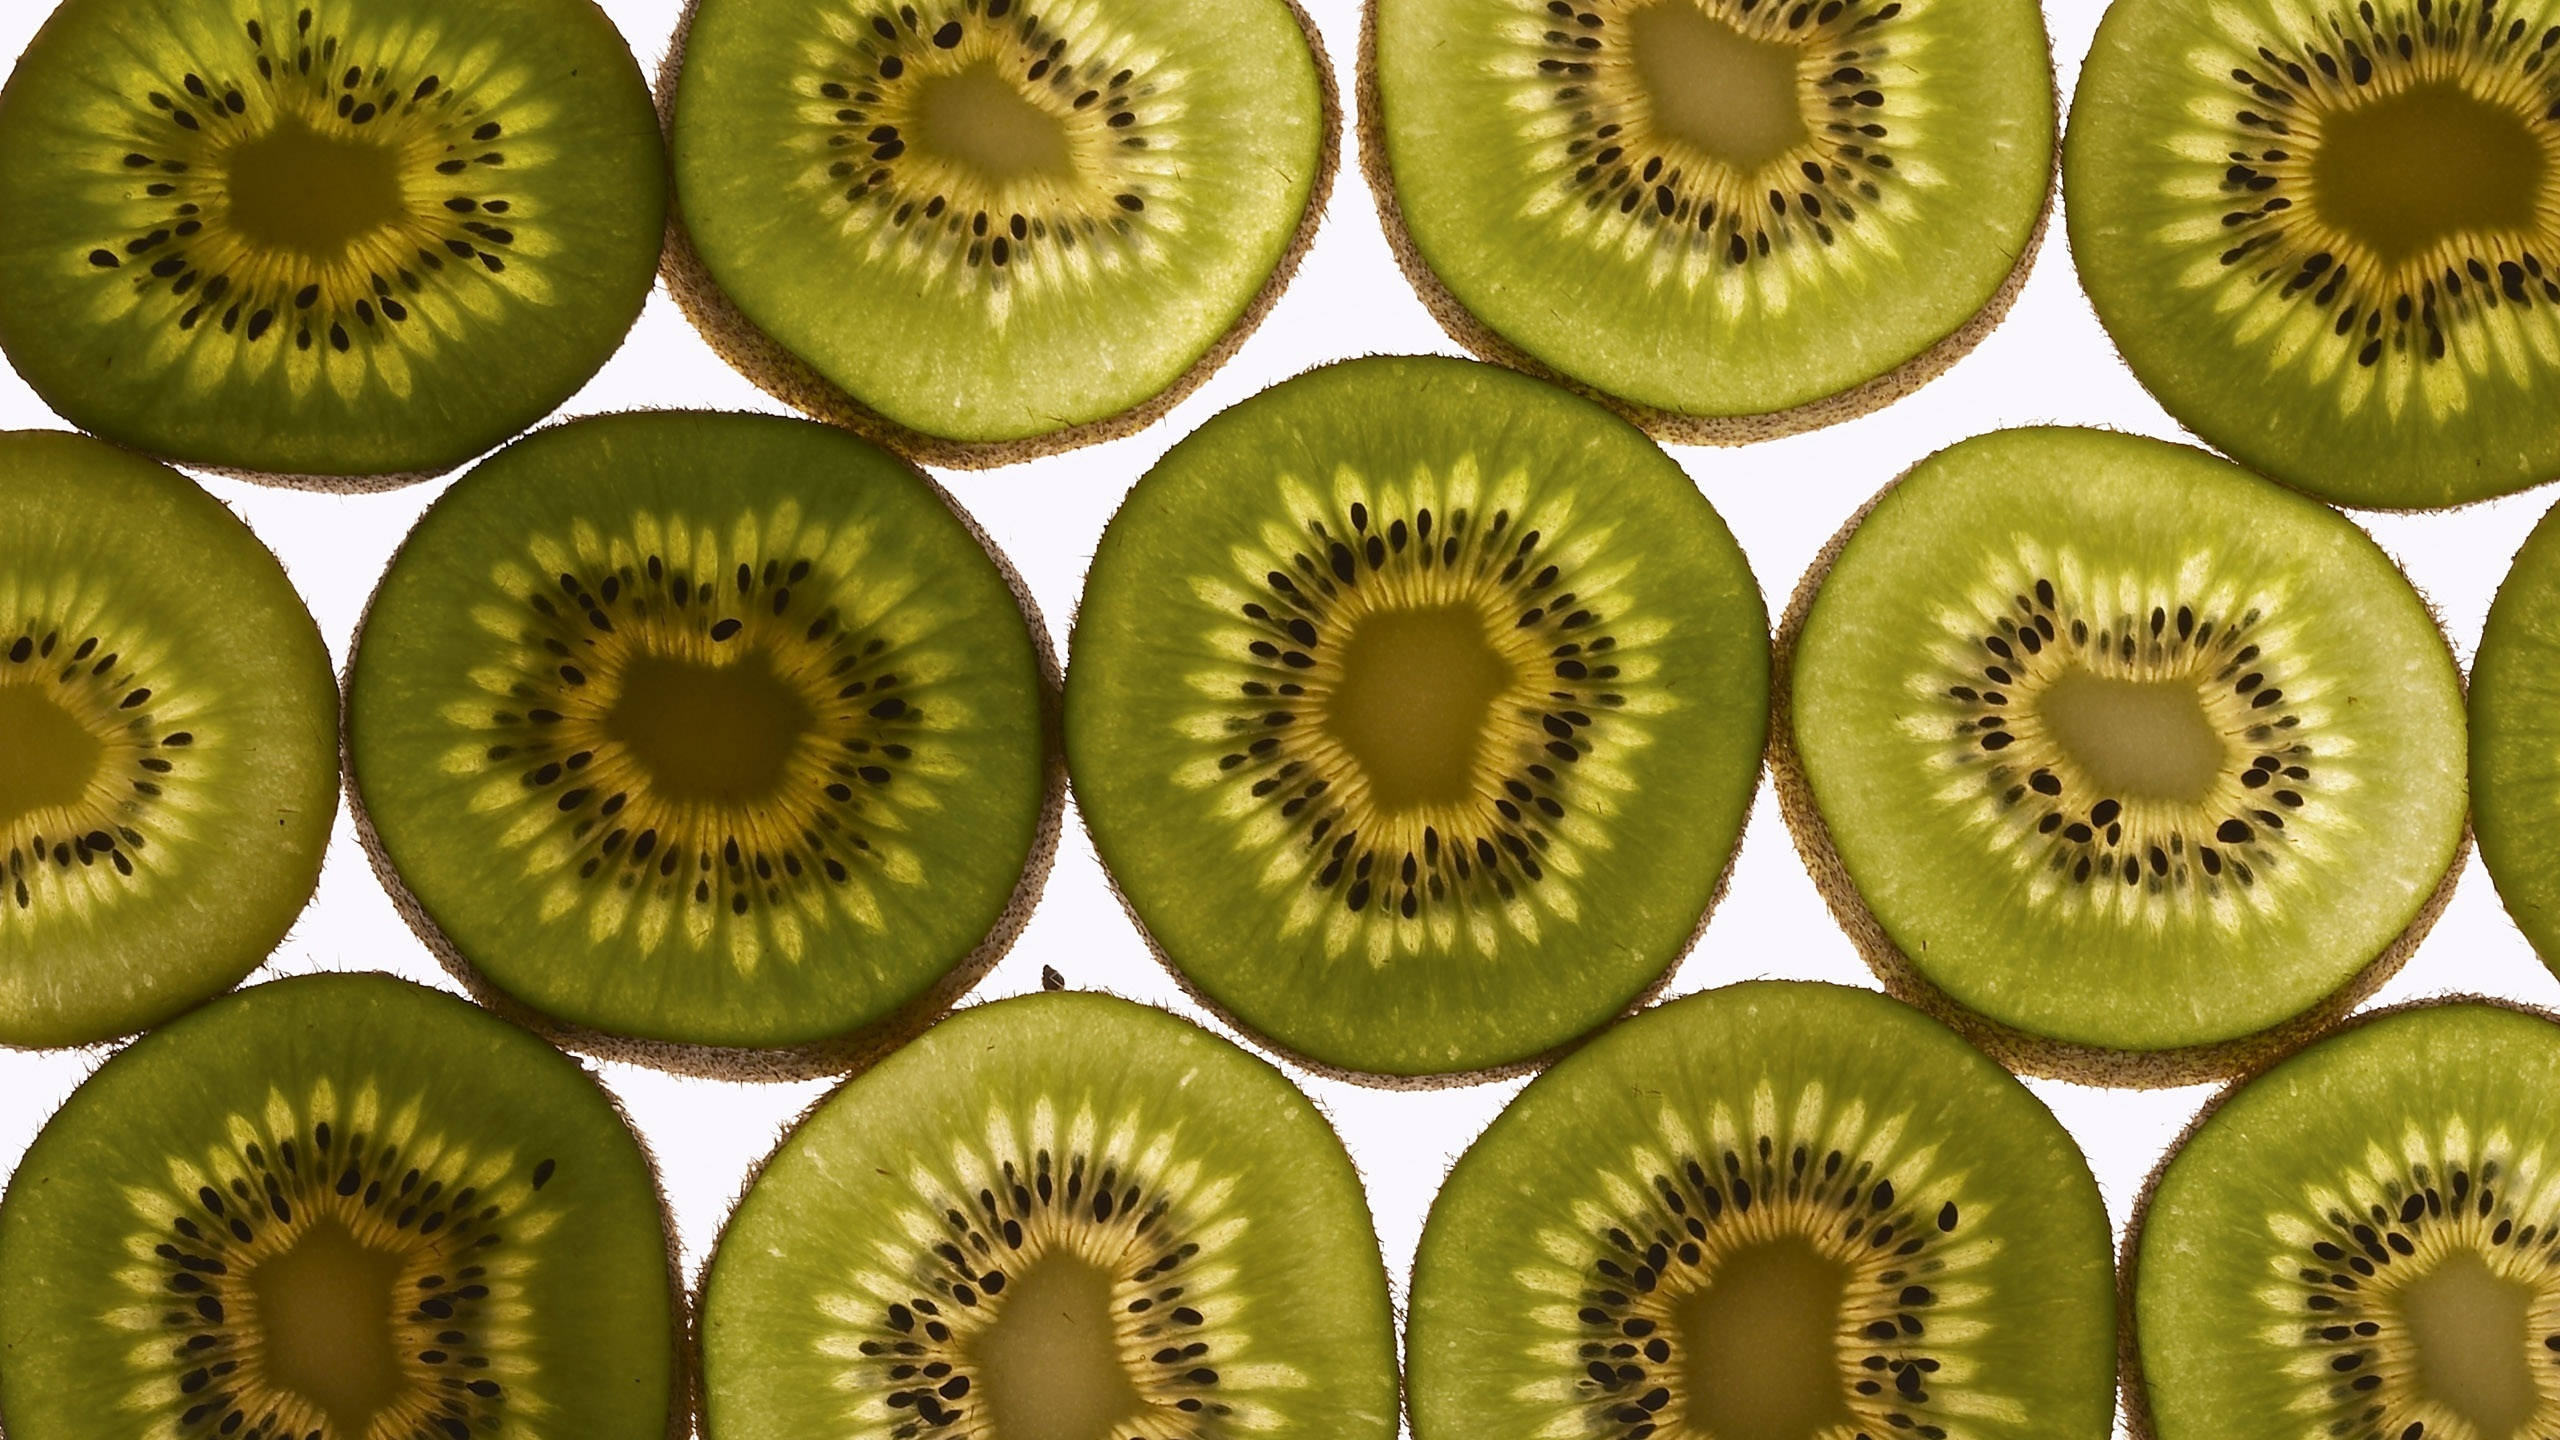 Stunning Pattern Photography Of Thin Slices Of The Kiwi Fruit Laid Out Through An Alternating Motif